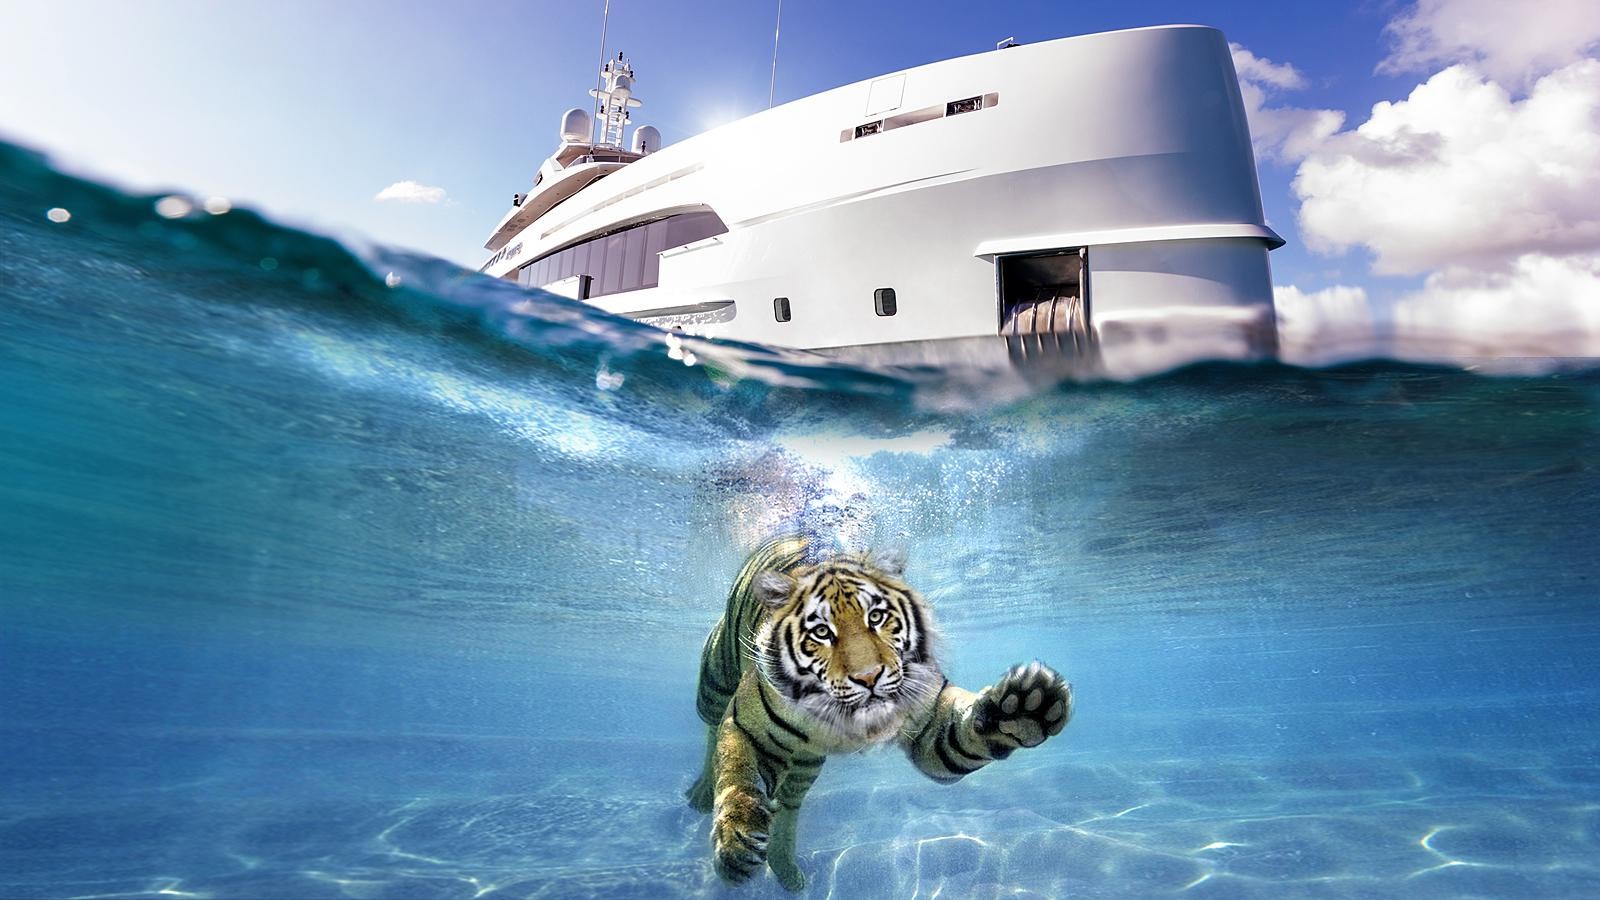 2022 the year of the Water Tiger: what's in store for Heesen